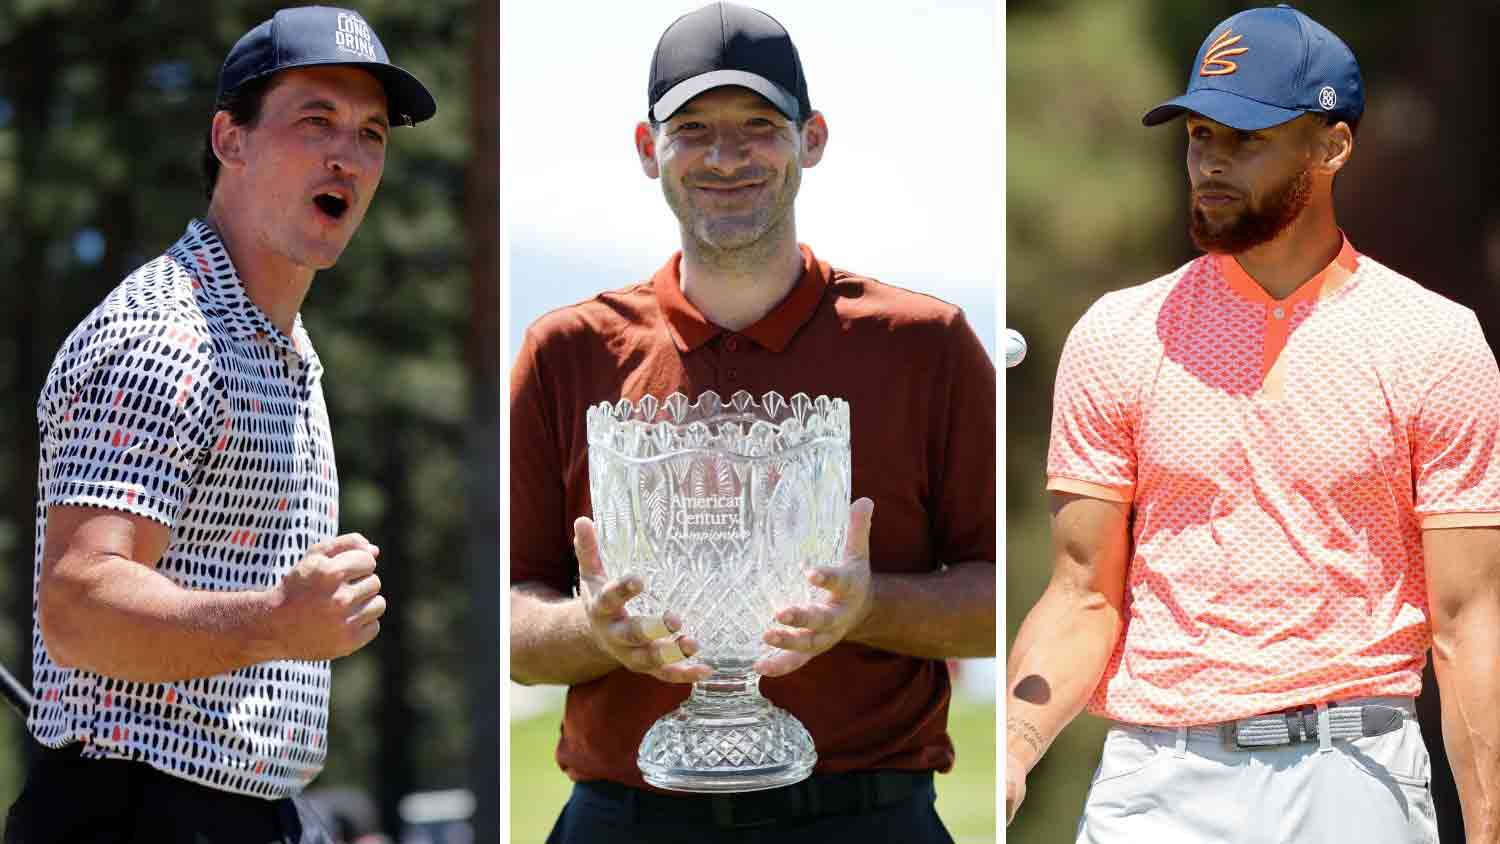 American Century golf tournament List of celebrities, how to watch, more